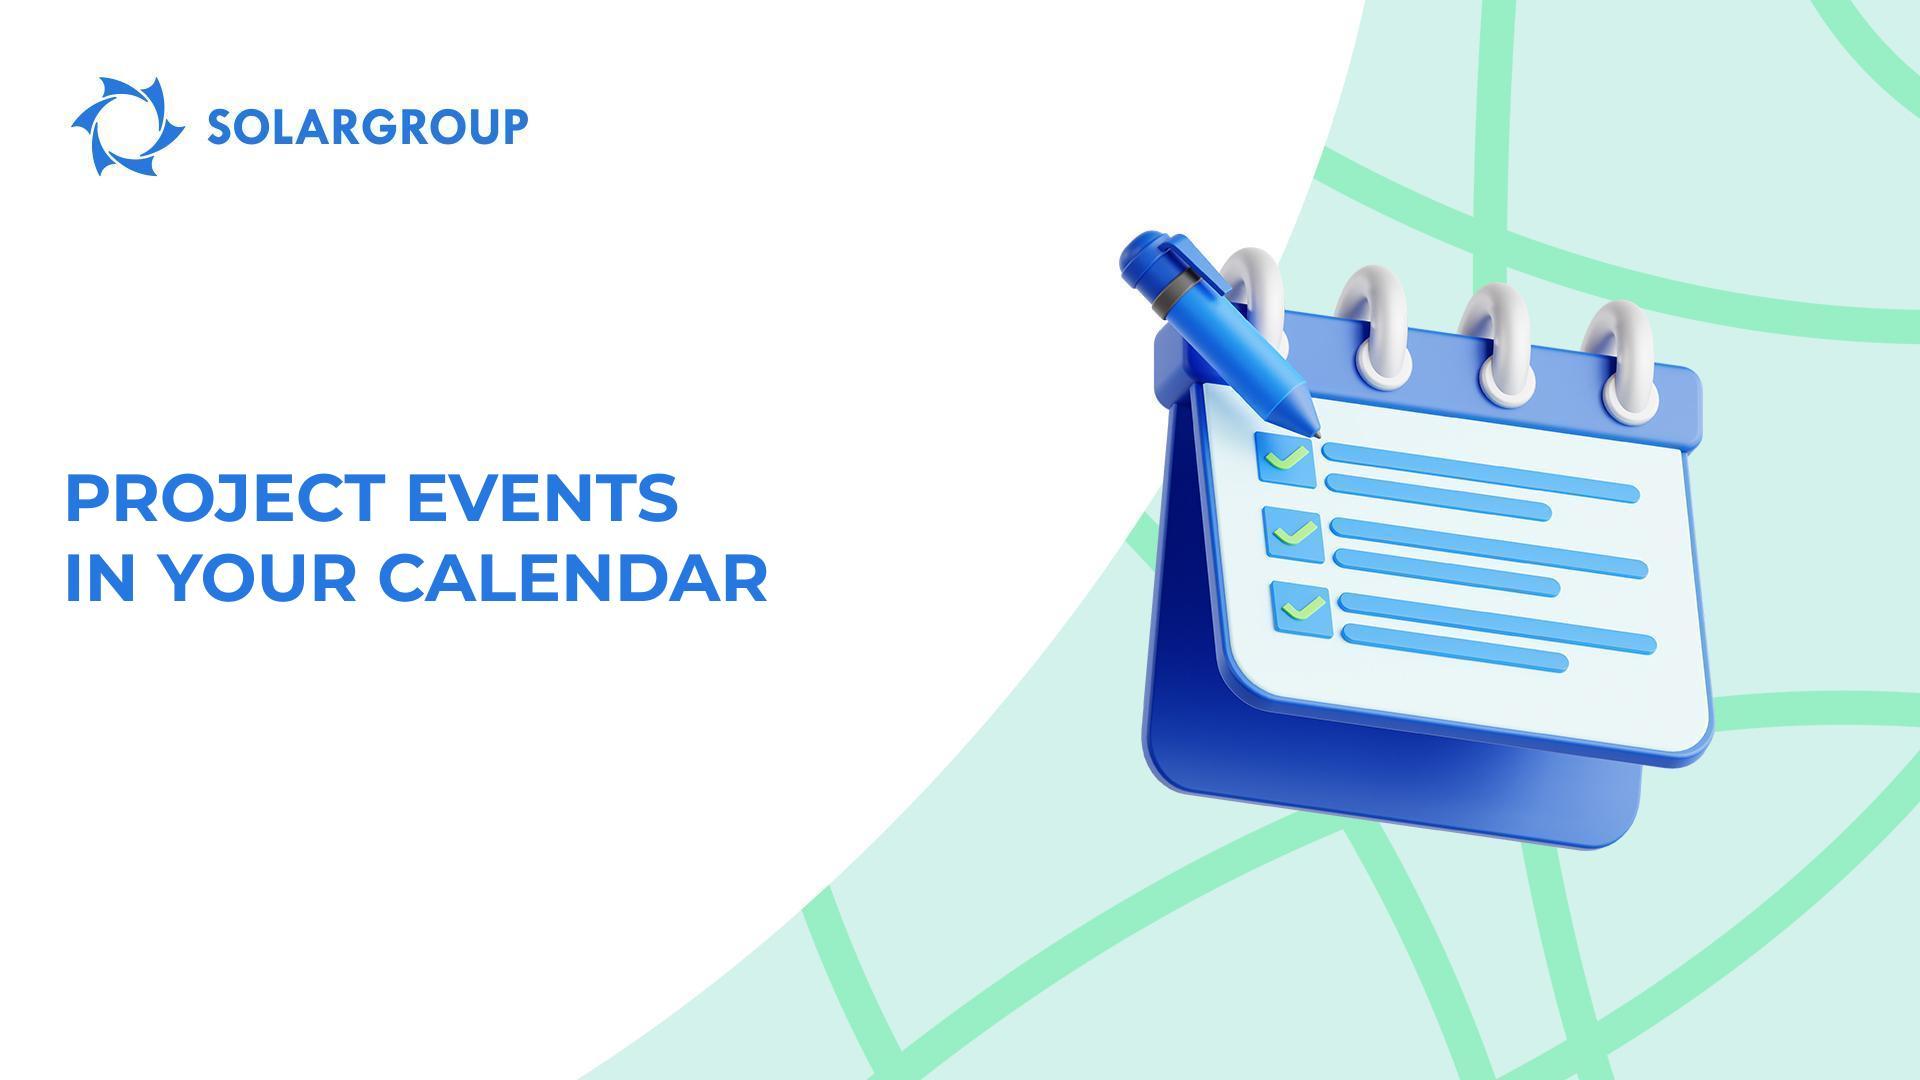 New feature in the back office: adding events to your calendar